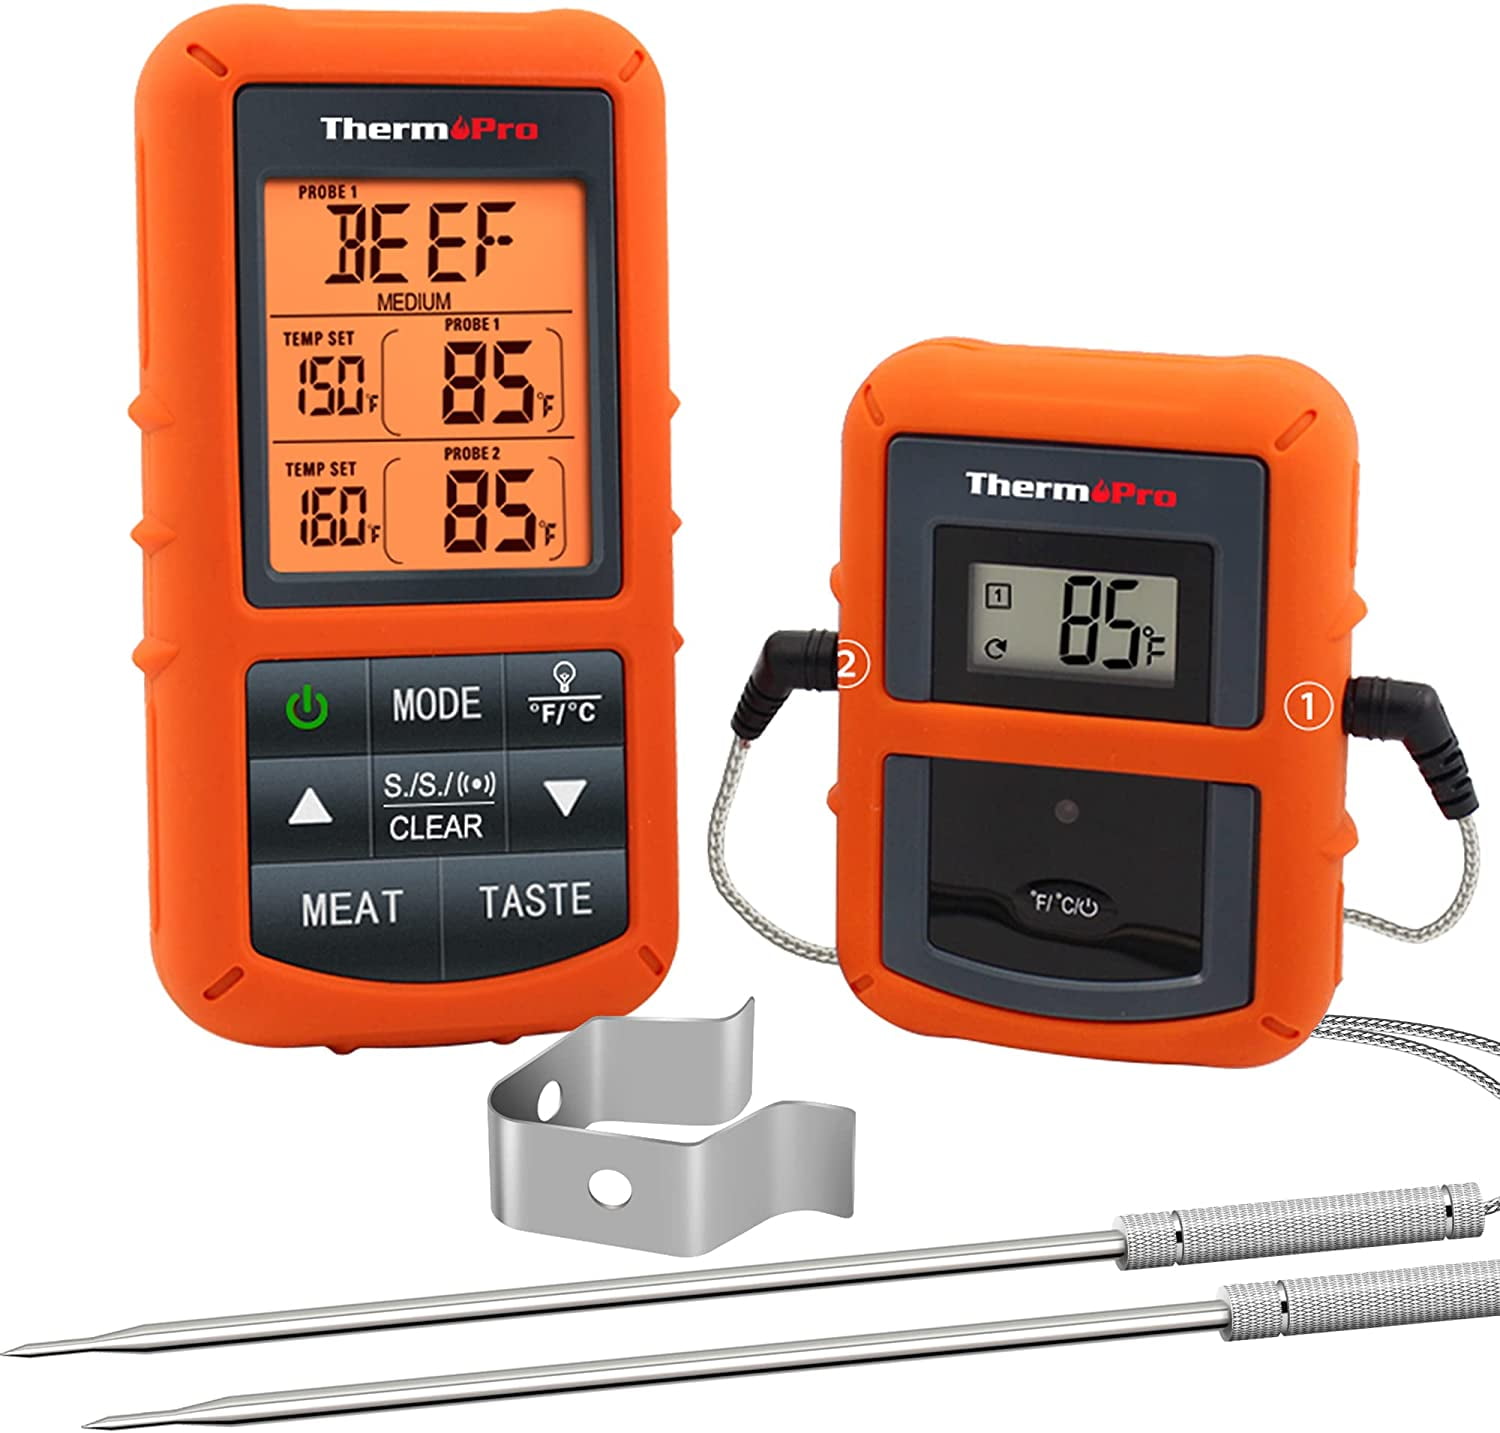 ThermoPro TP-20 Ultimate BBQ Thermometer Bundle 